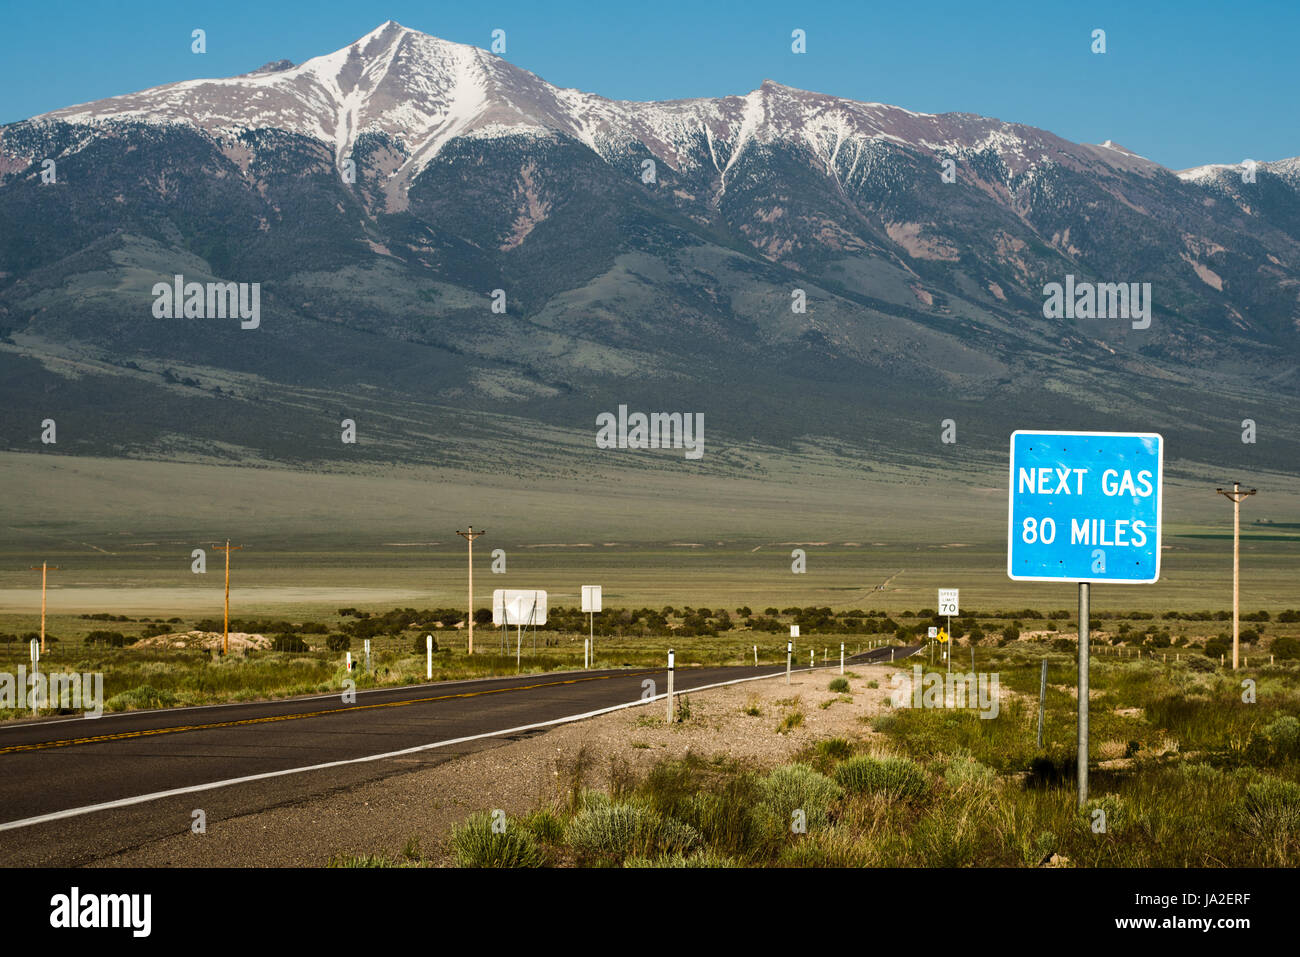 A sign warns that the next gas station is 80 miles away, with a snow-capped mountain in the background. White Pine County in Nevada. Stock Photo